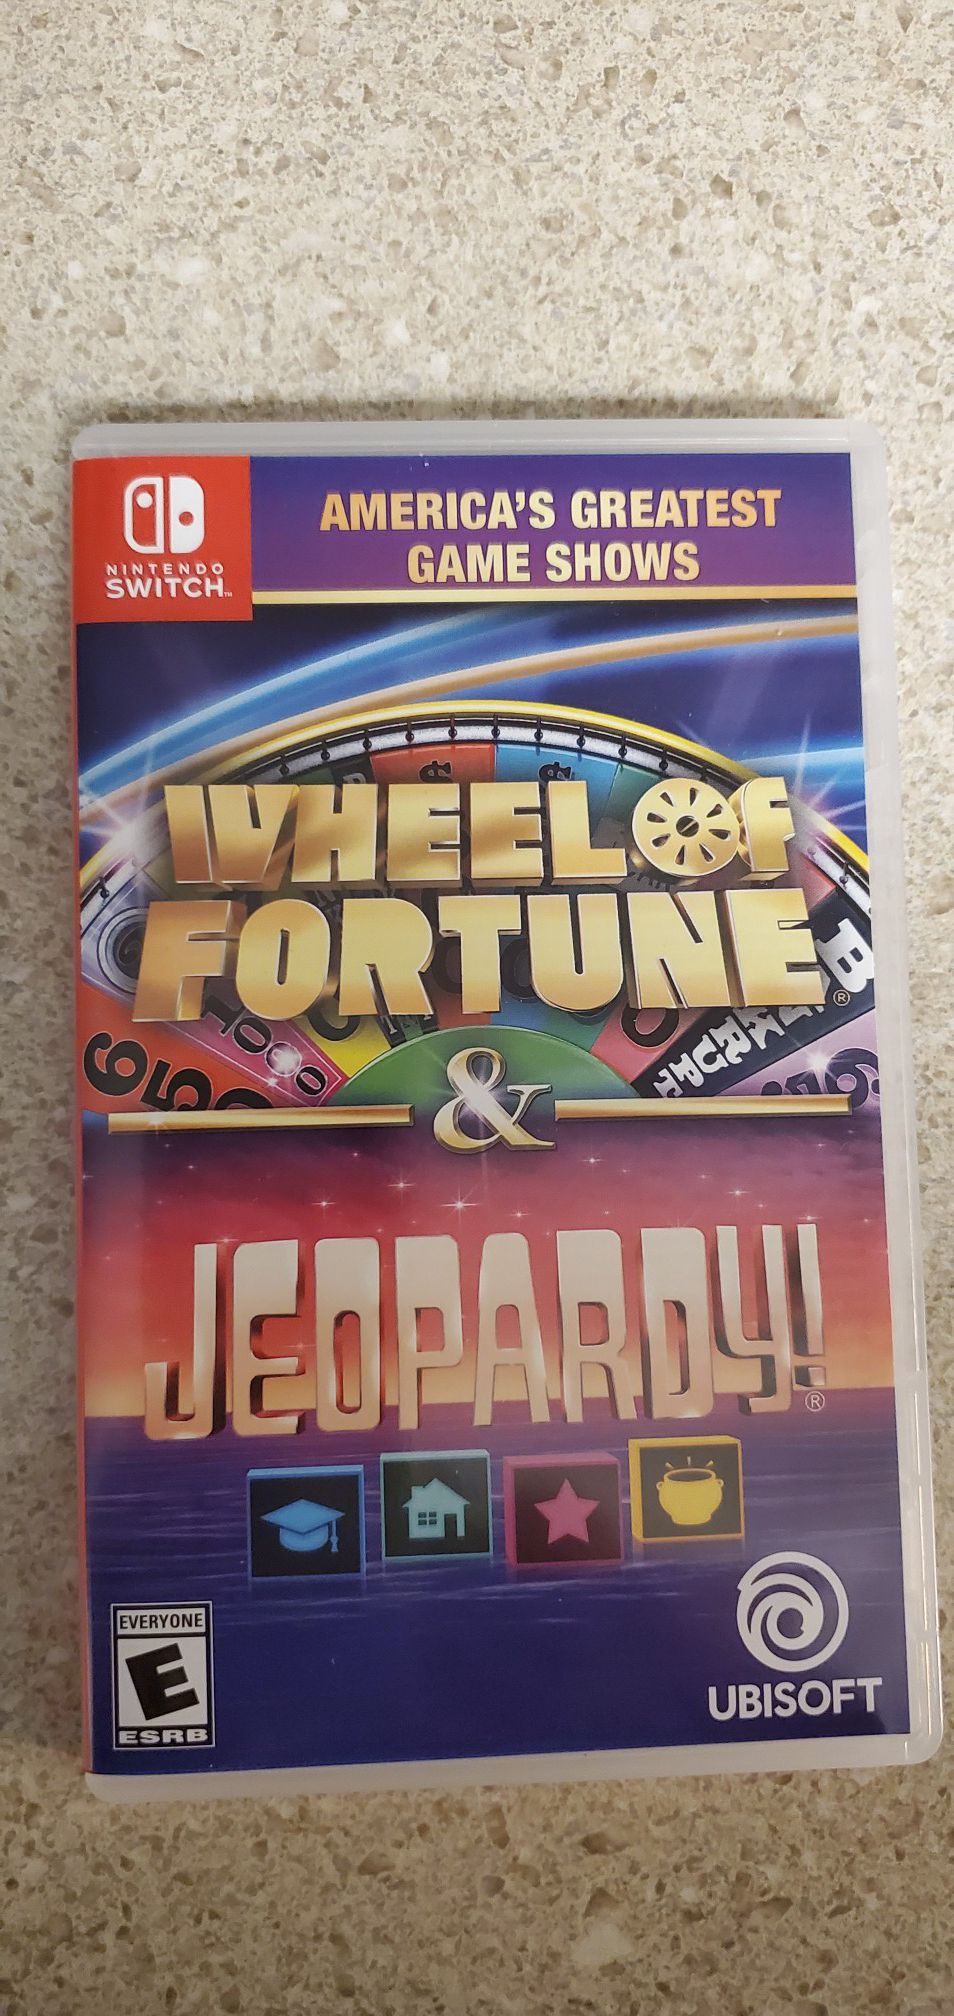 New 2 In 1 Wheel Of Fortune And Jeopardy Game For Nintendo Switch